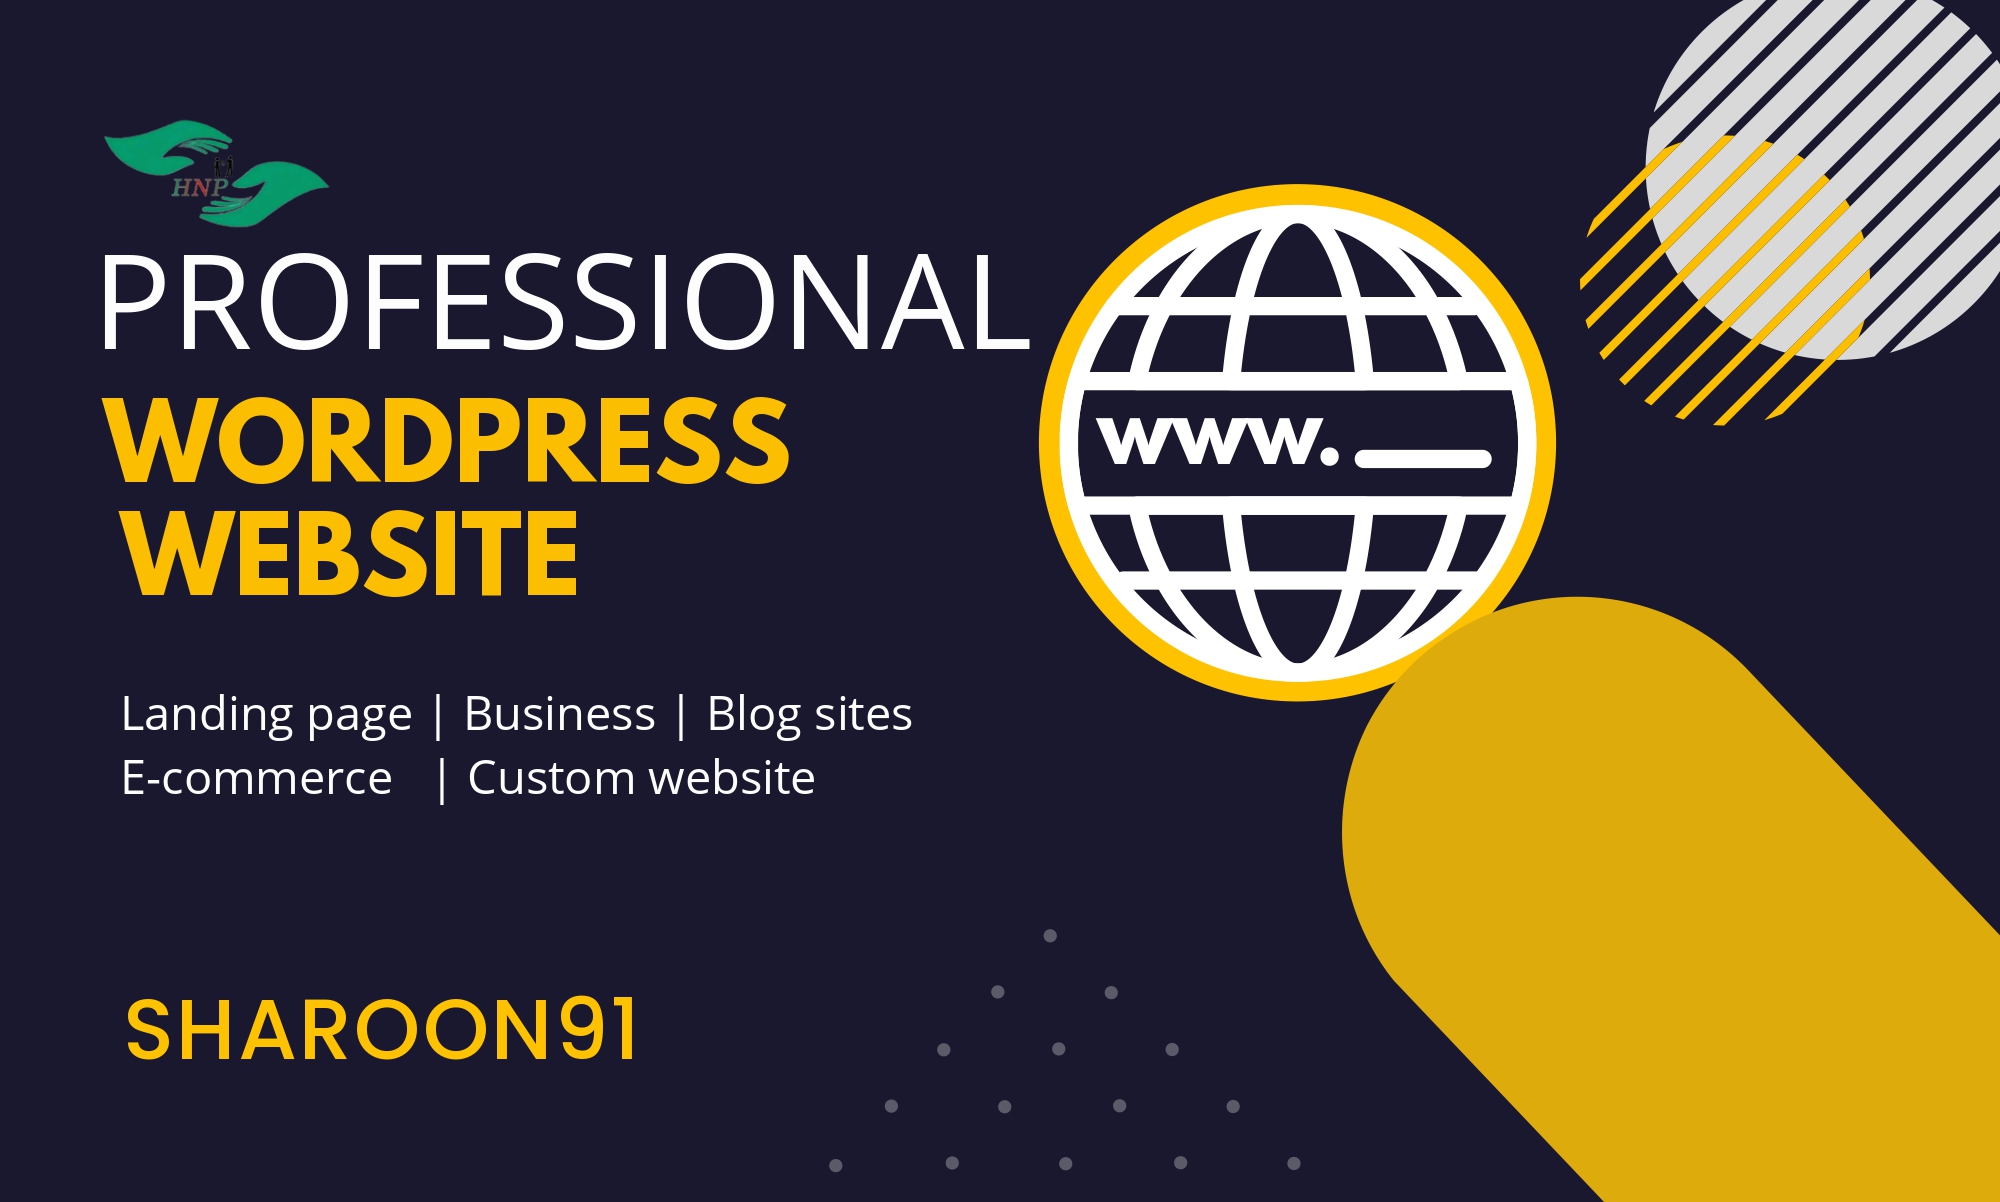 211491I will develop any kind of business, blogging, or personal website by wordpress